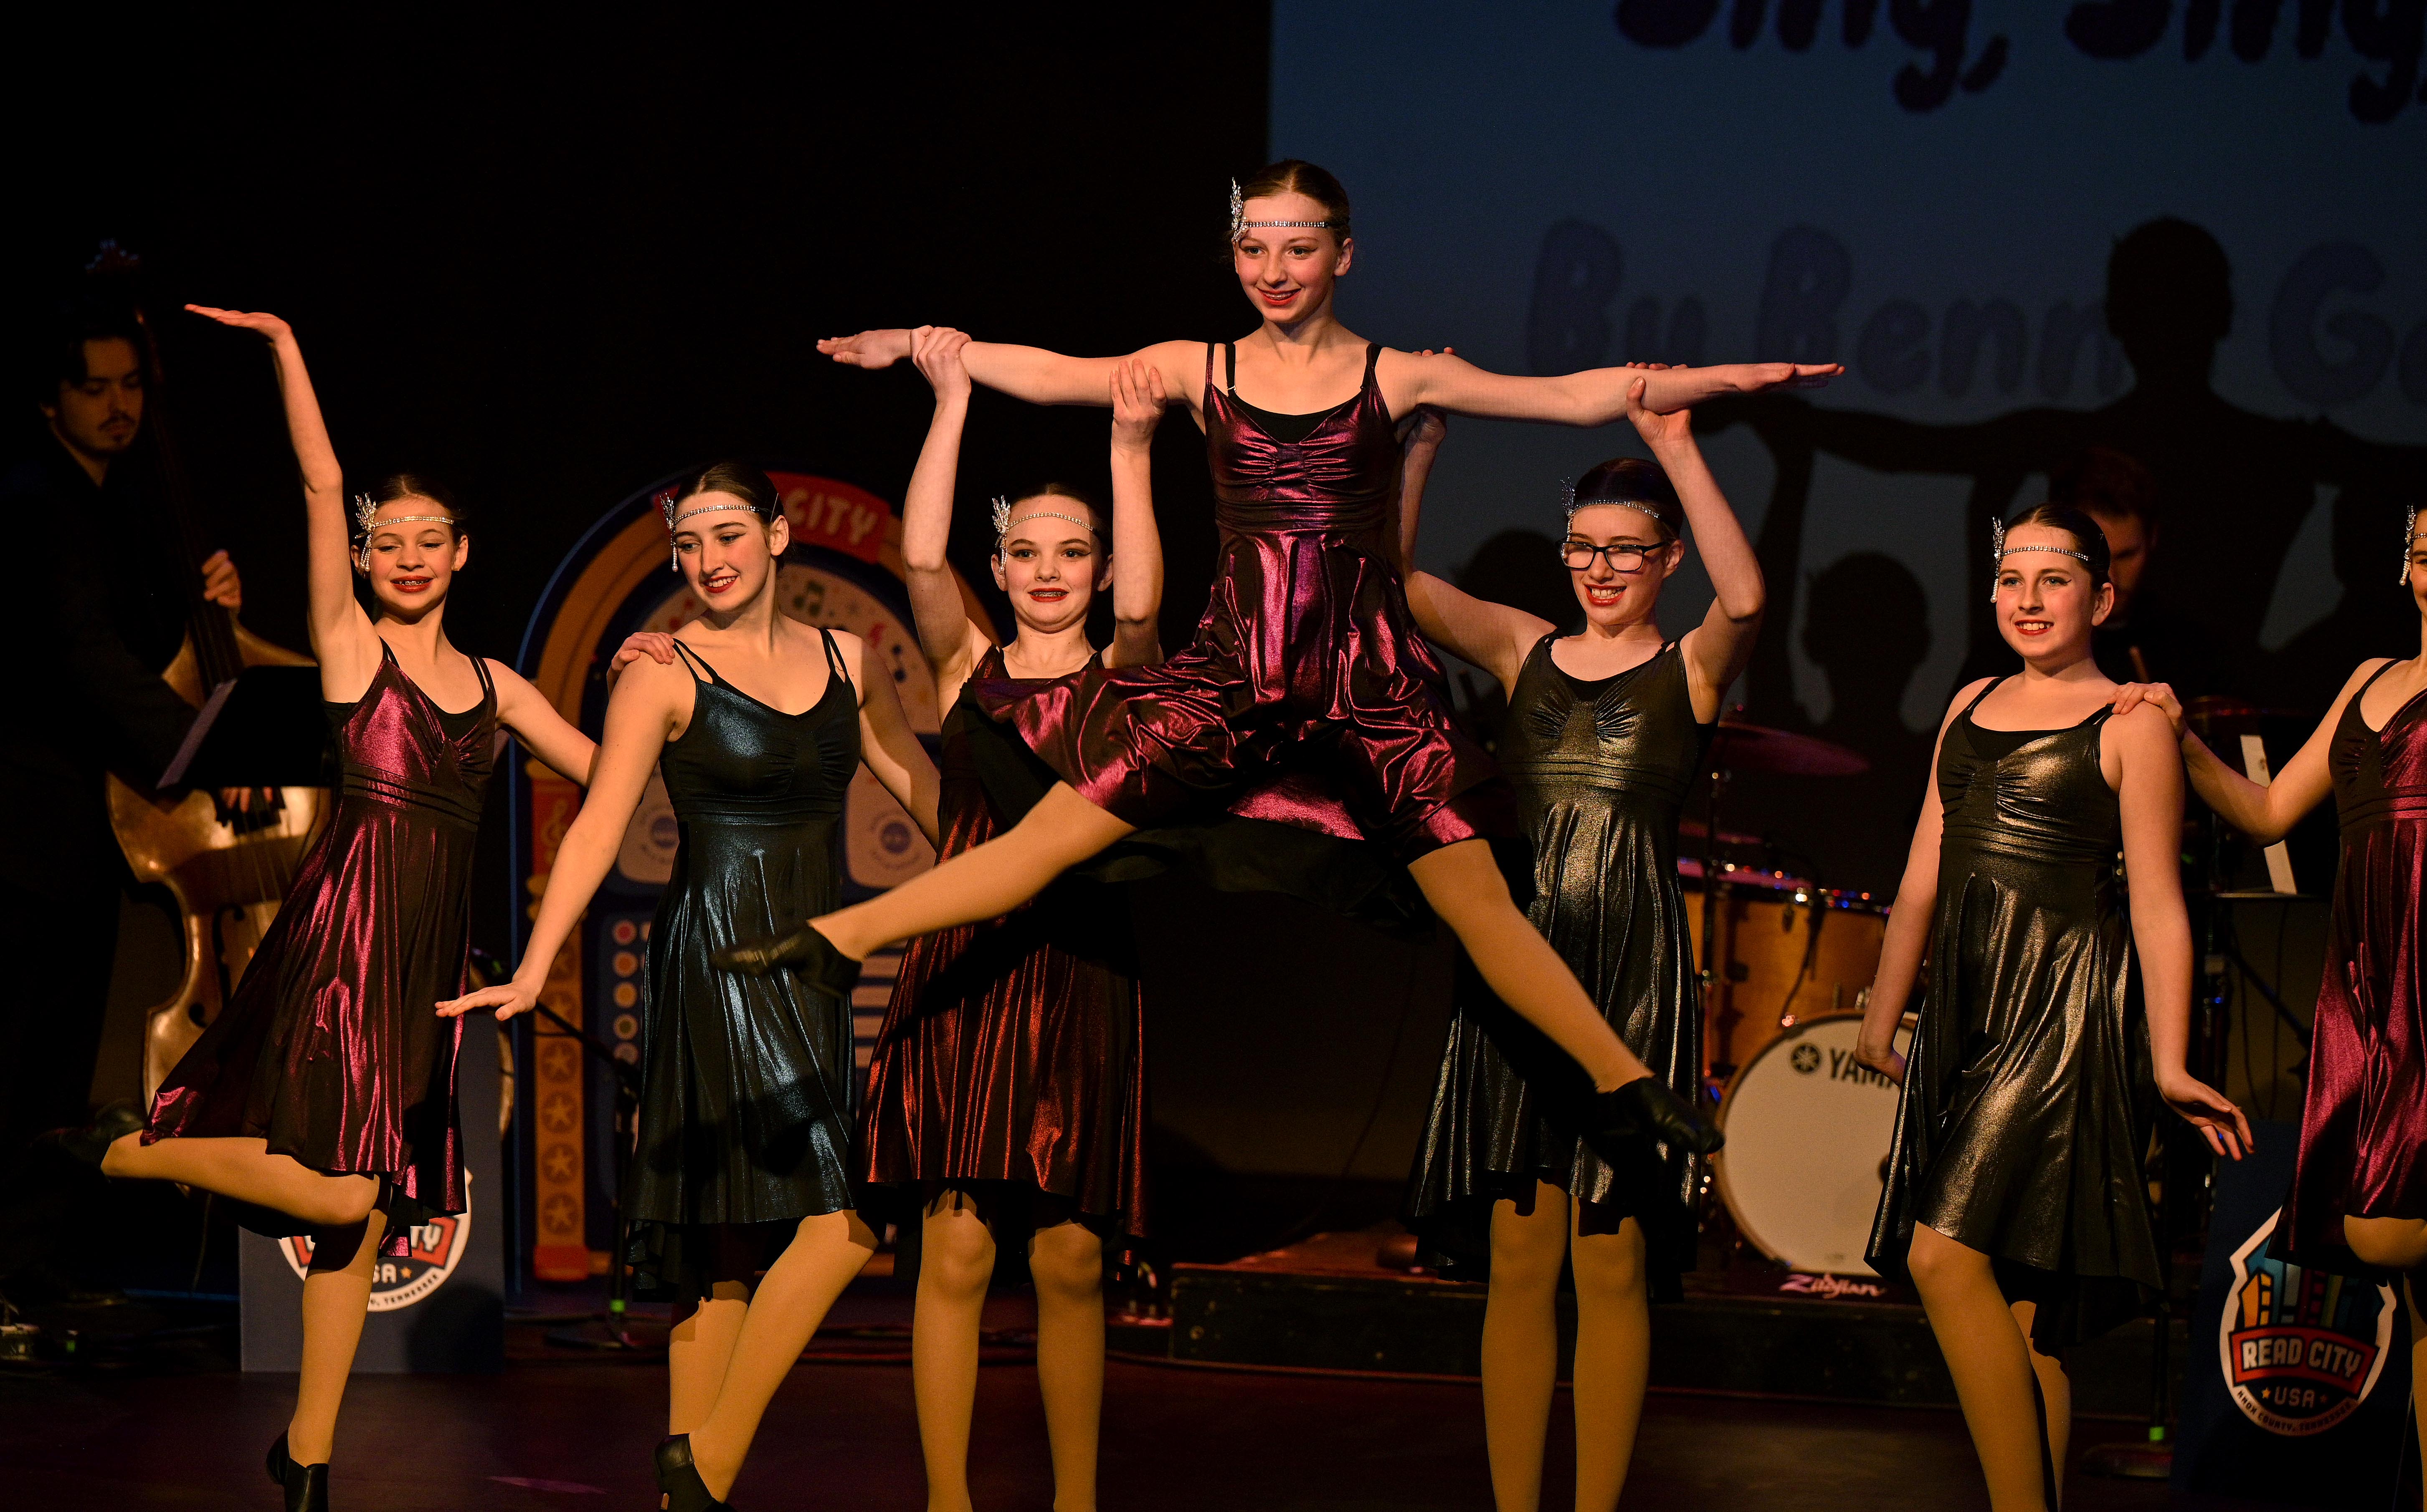 seven young dancers are arranged in a row on stage, mid-Charleston-style dance moves. Two in the middle hold one dancer aloft by her arms as she does the splits